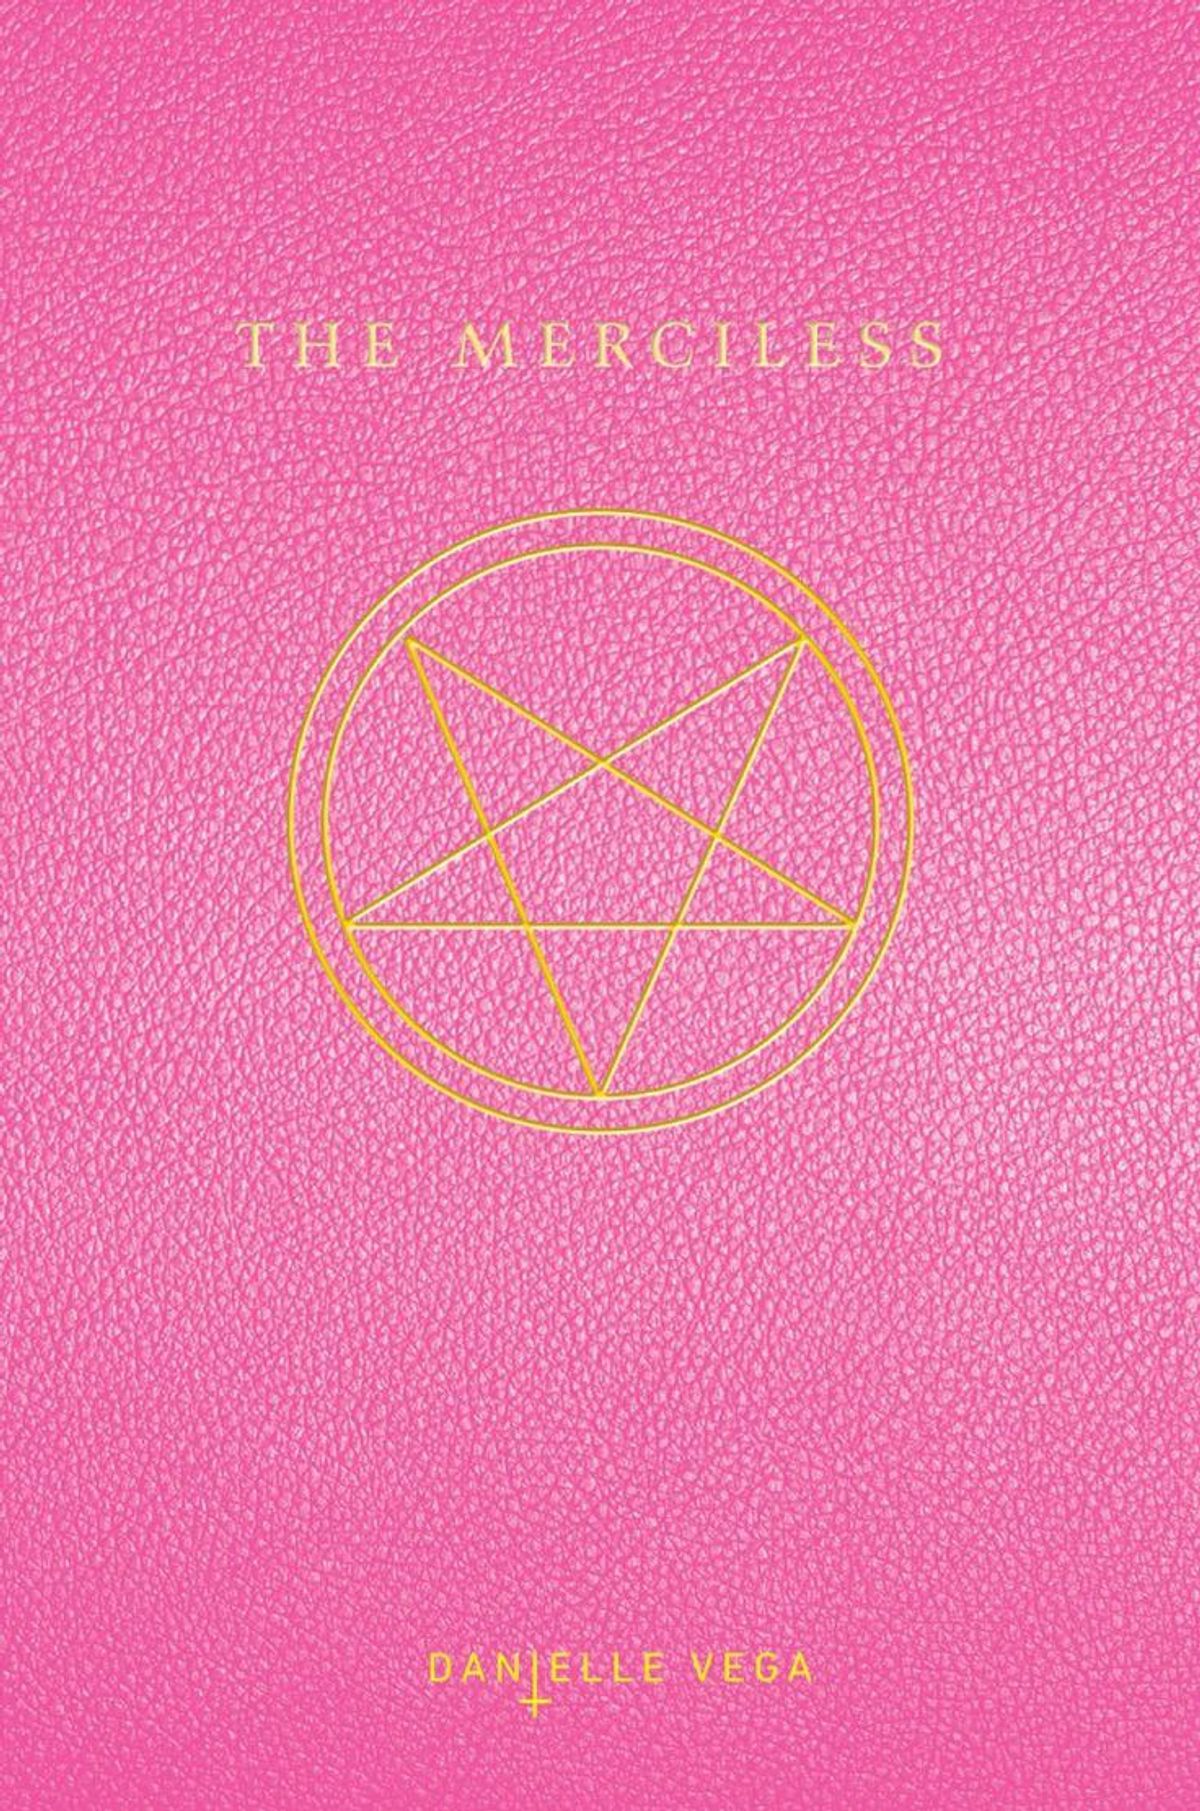 "The Merciless" Book Review